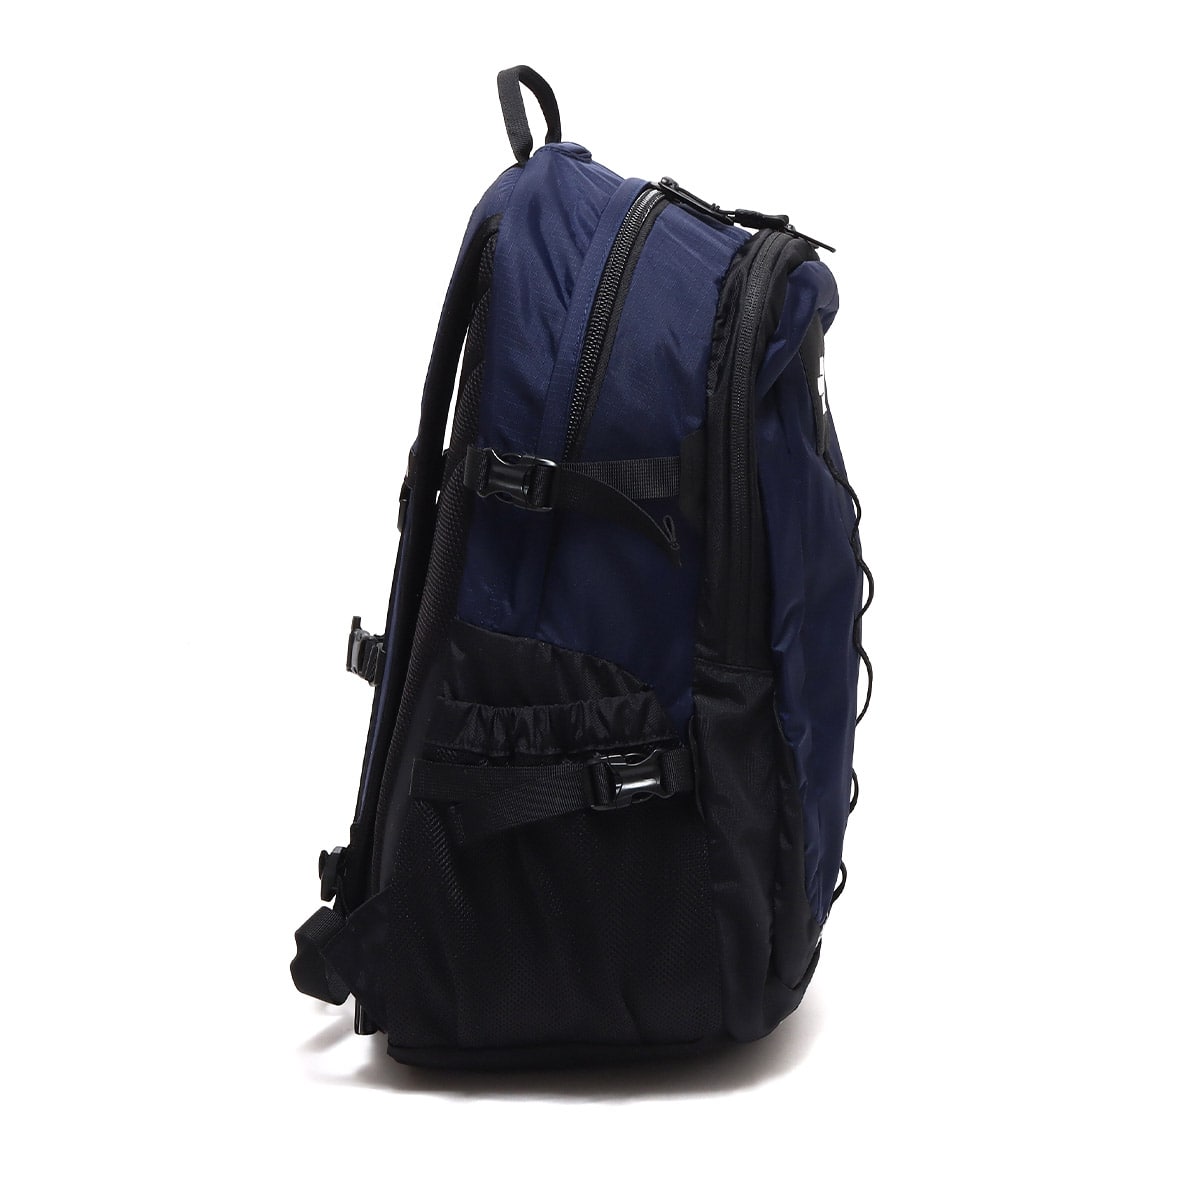 THE NORTH FACE ホットシヨット 23SS K NM72302